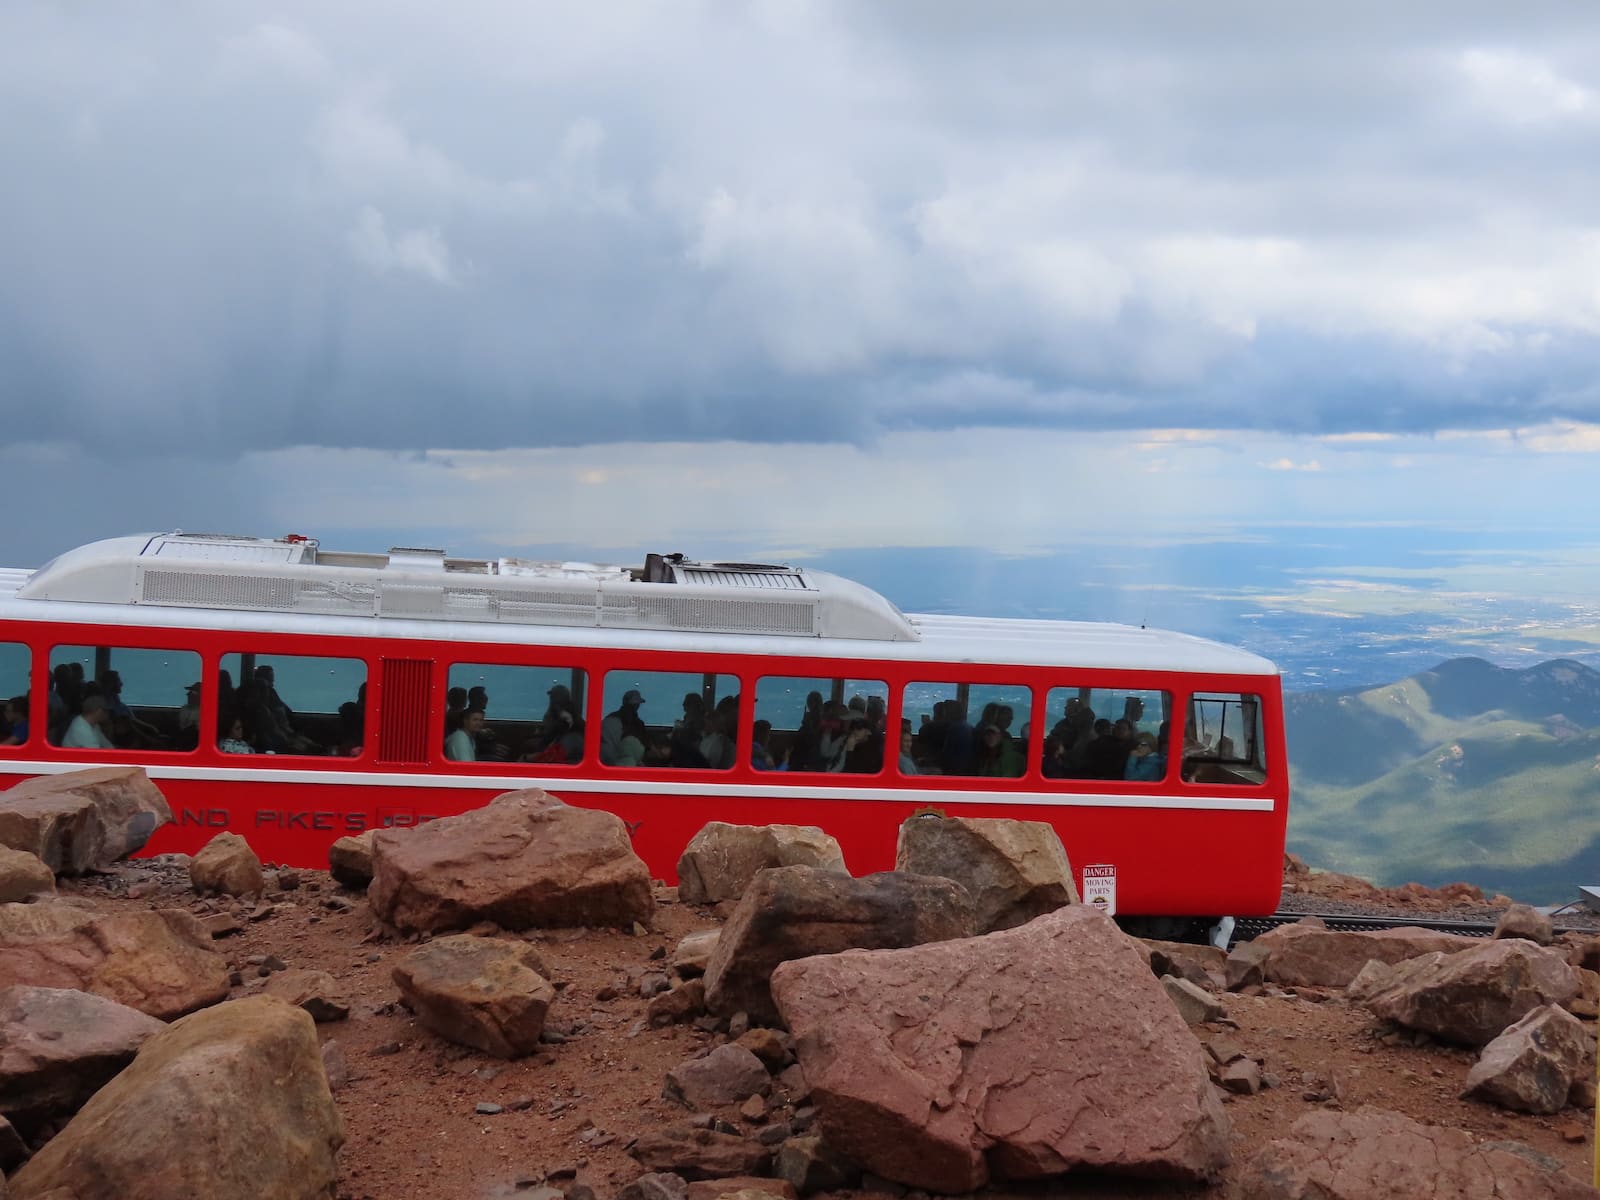 Pikes Peak Cog Railway train and view from Pikes Peak